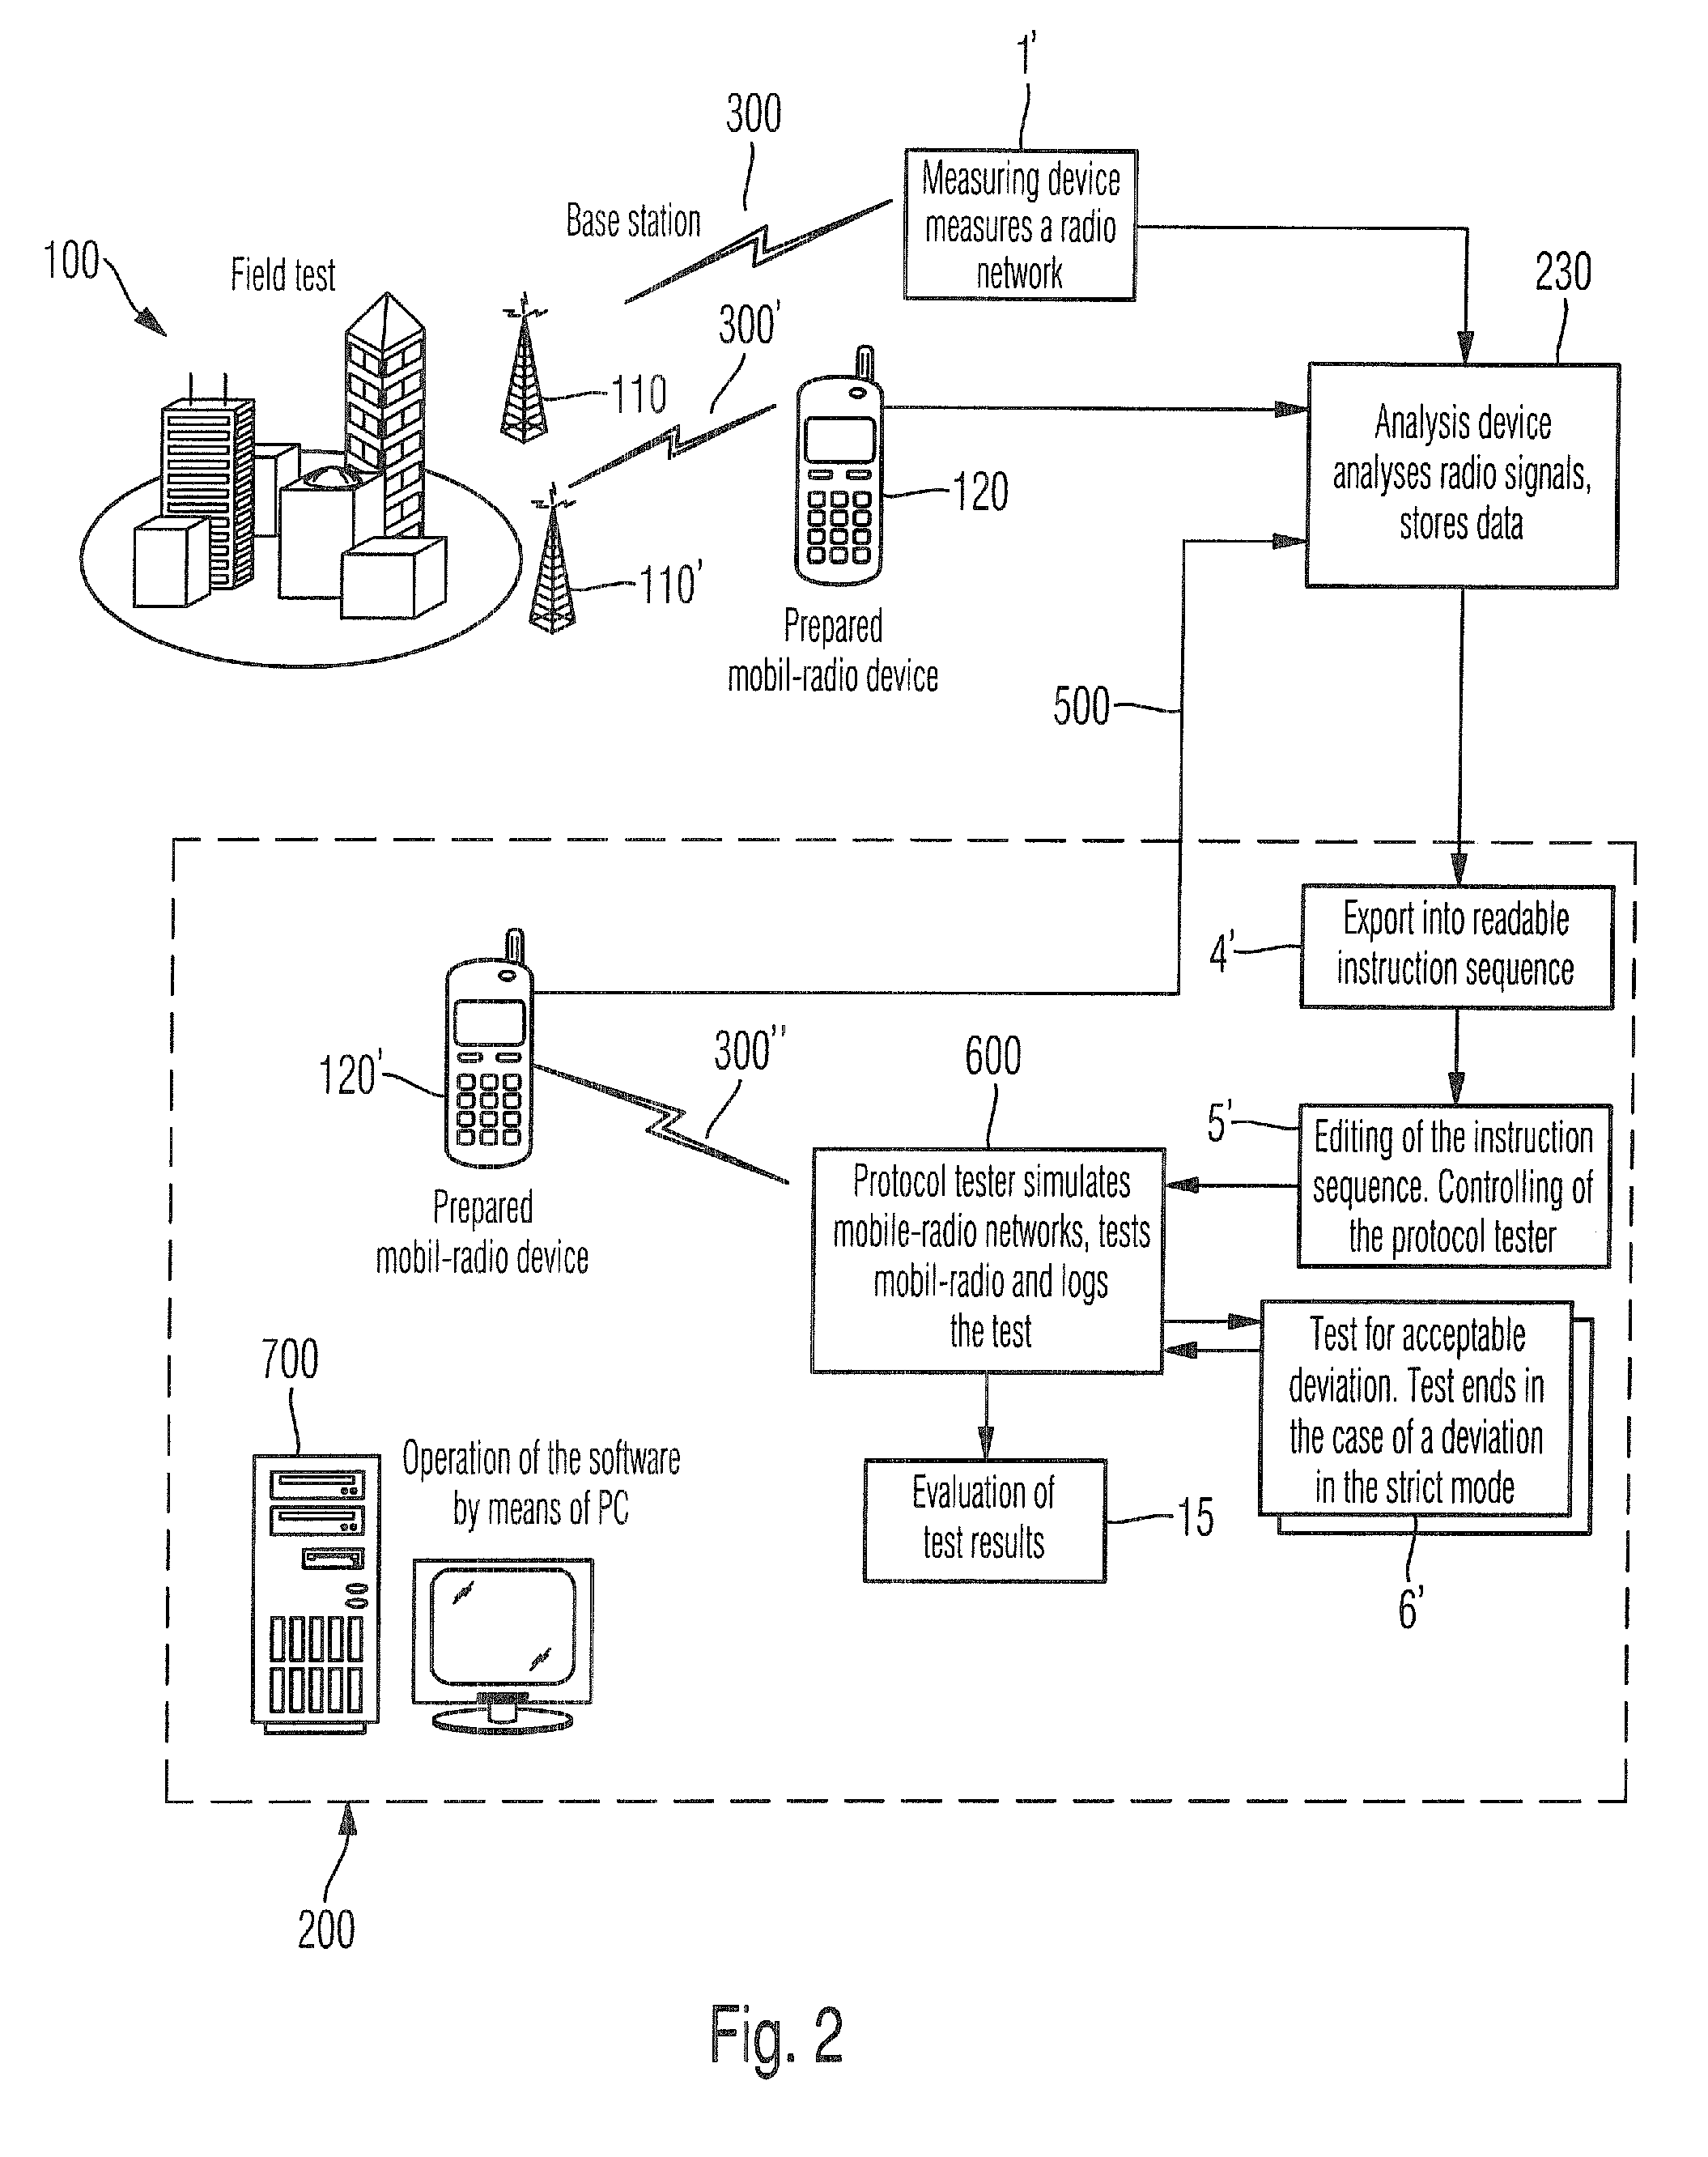 Method for testing a mobile radio device